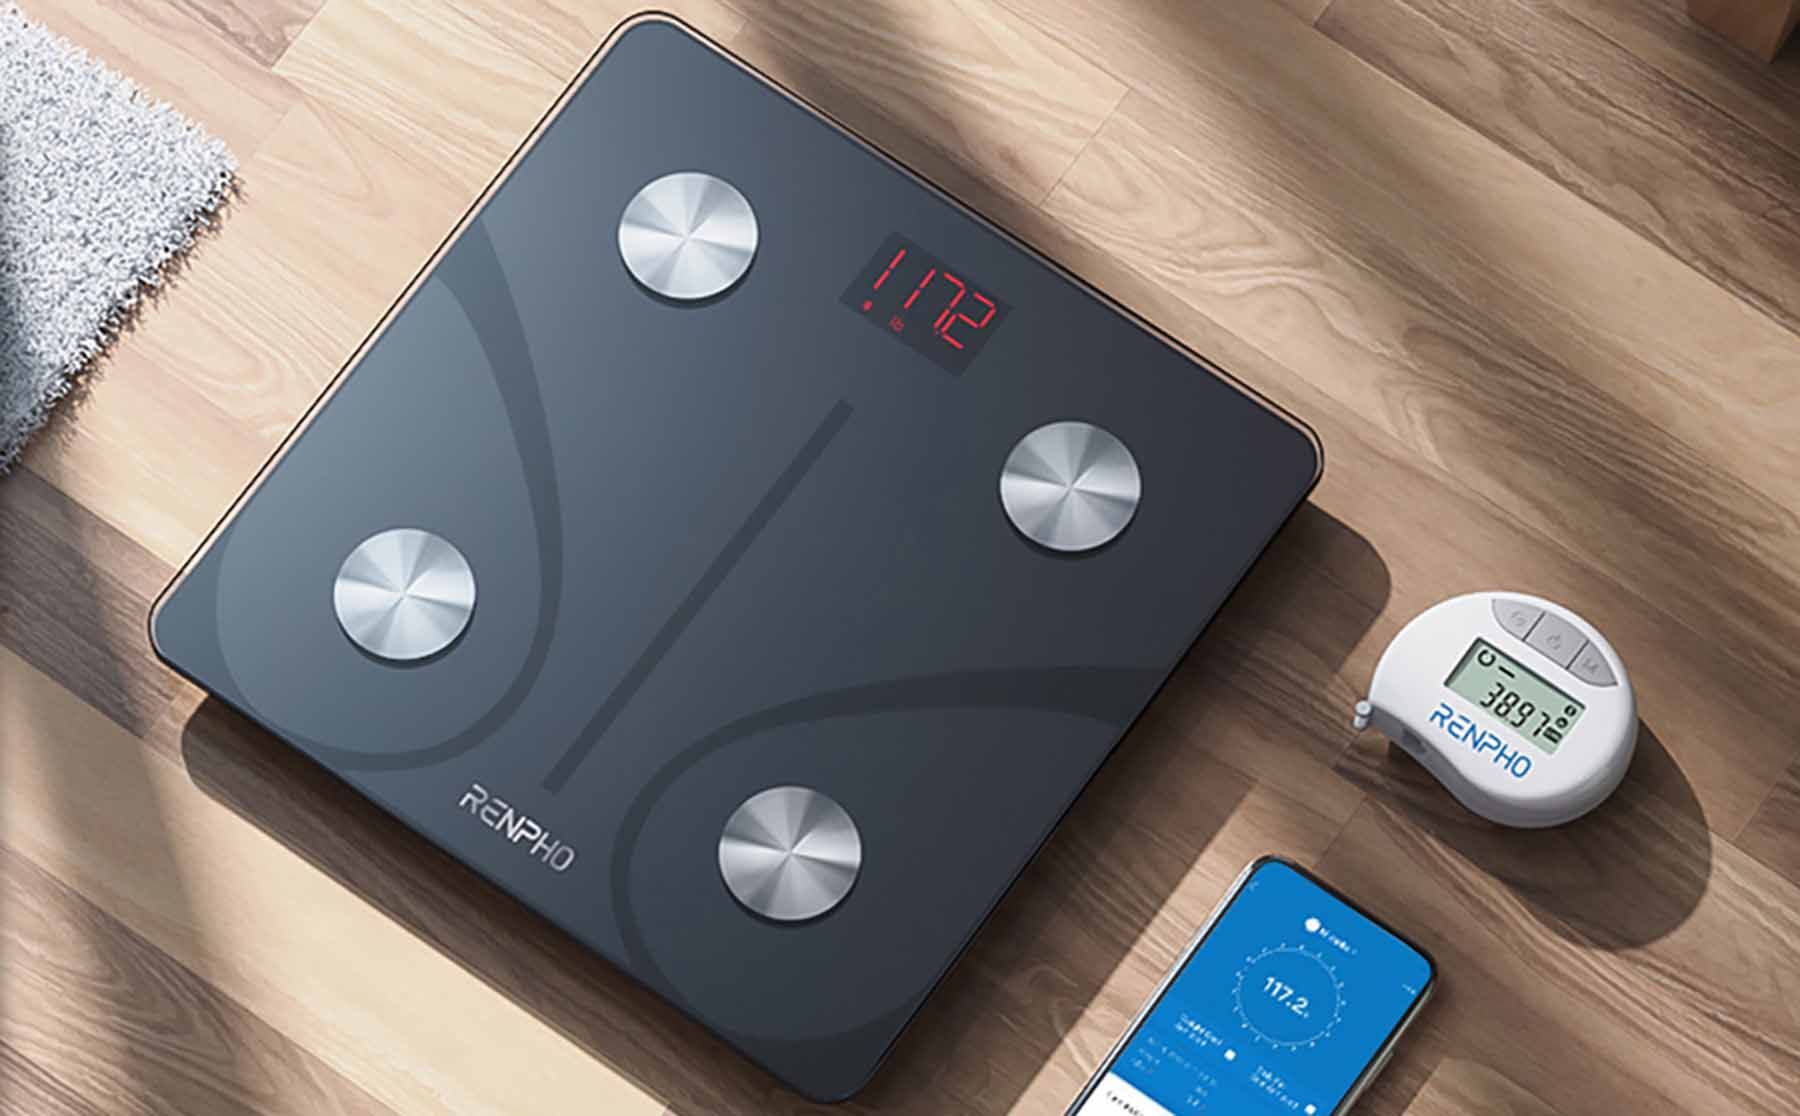 Renpho smart scale on wooden floor with phone and other gadget